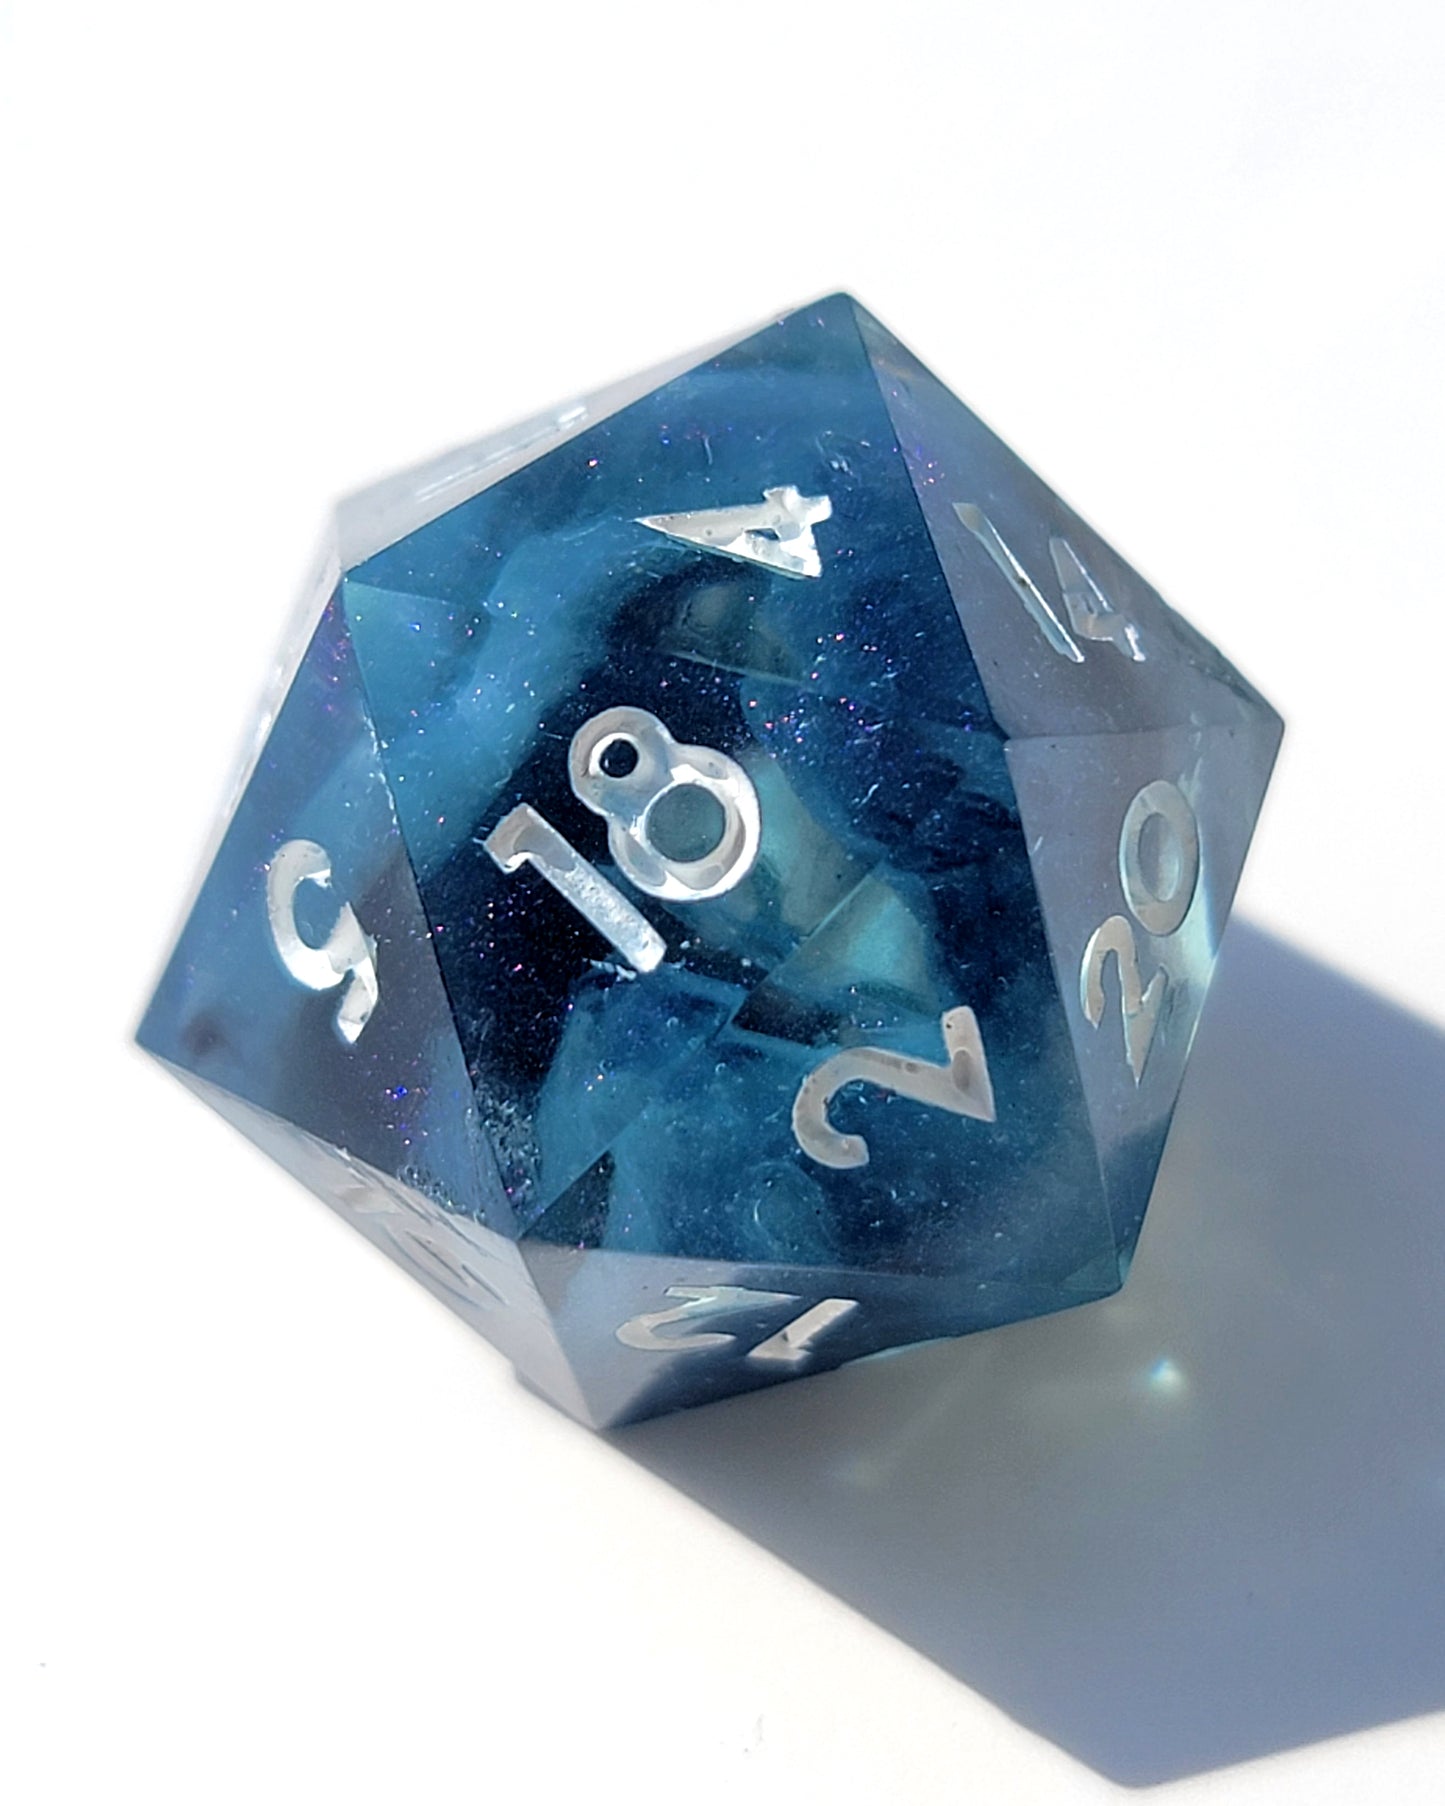 Lagoon of Stars - D20 D&D Dice| Hand Crafted Dungeons and Dragons Dice